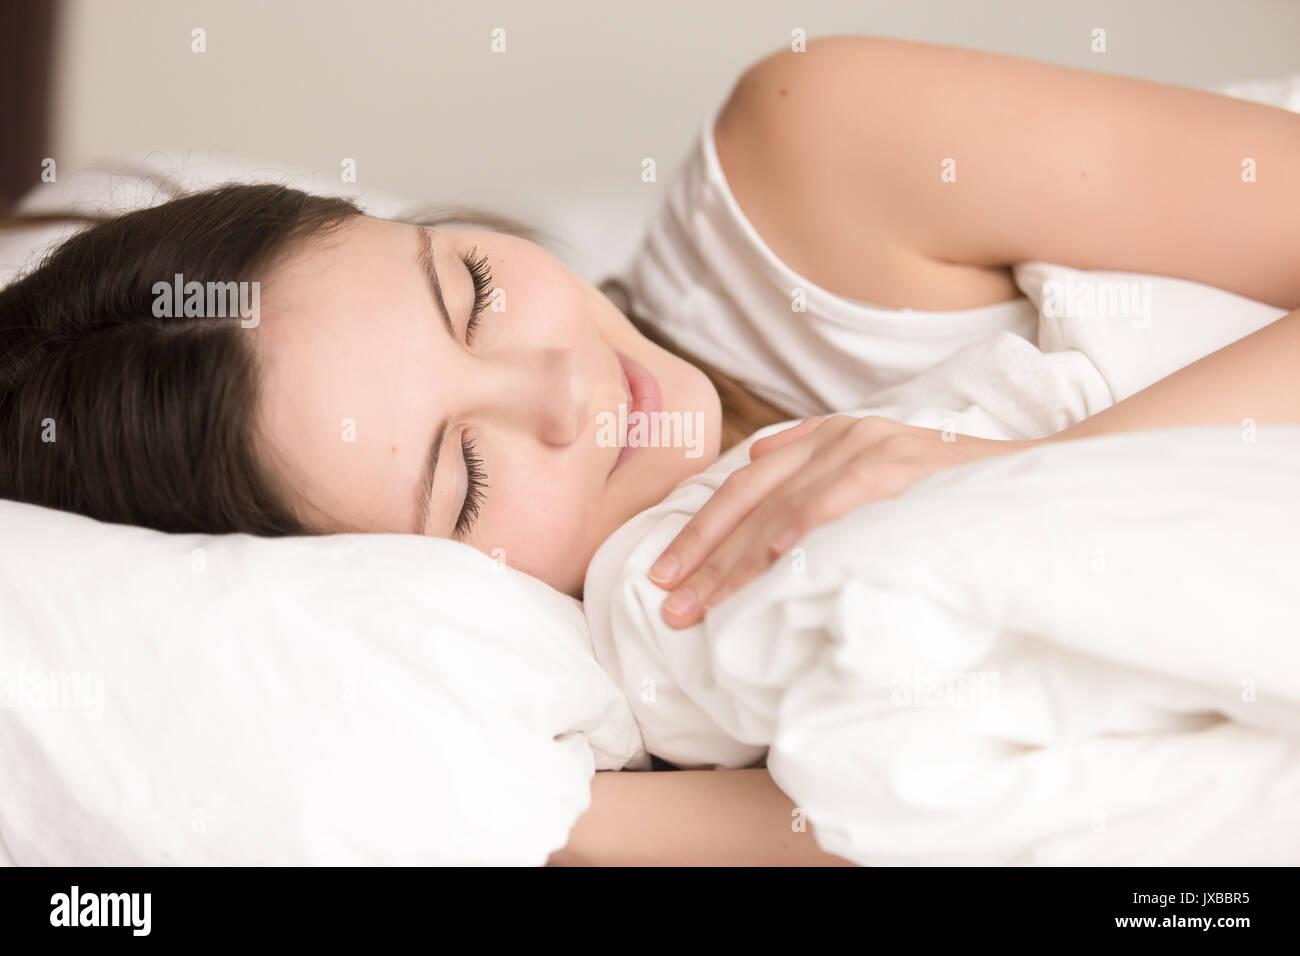 Attractive young woman sleeping comfortably in bed, close up hea Stock Photo